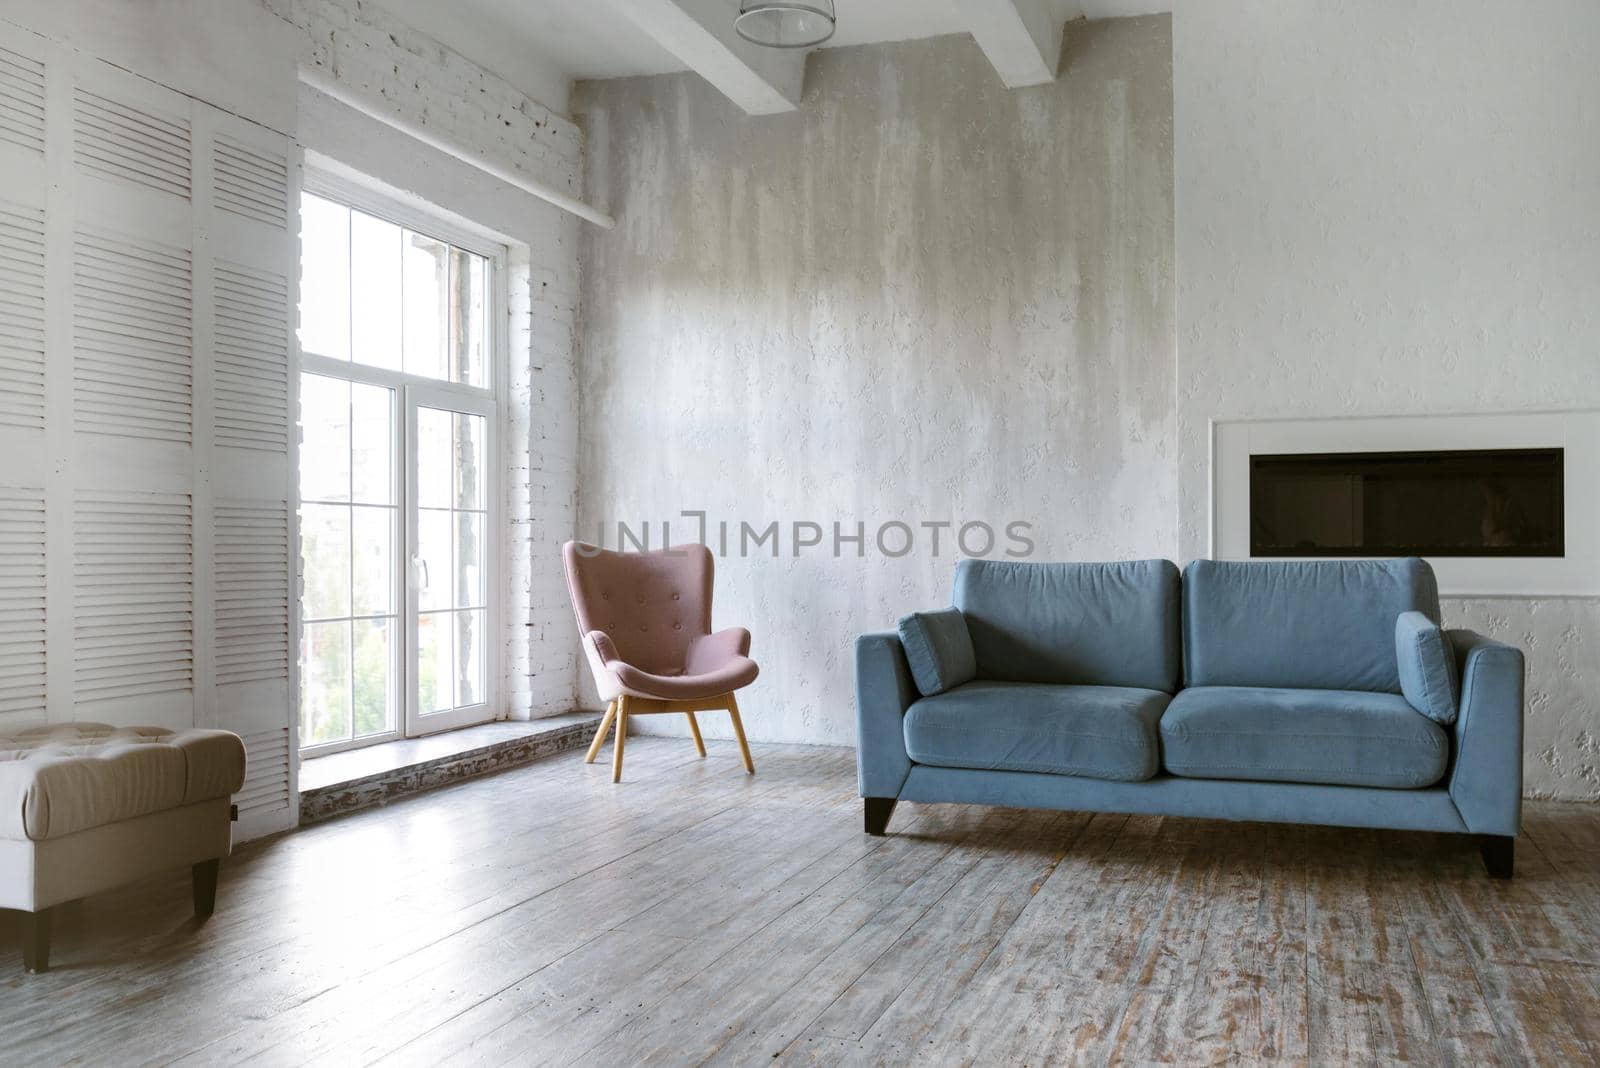 room interior design6. High quality beautiful photo concept by Zahard